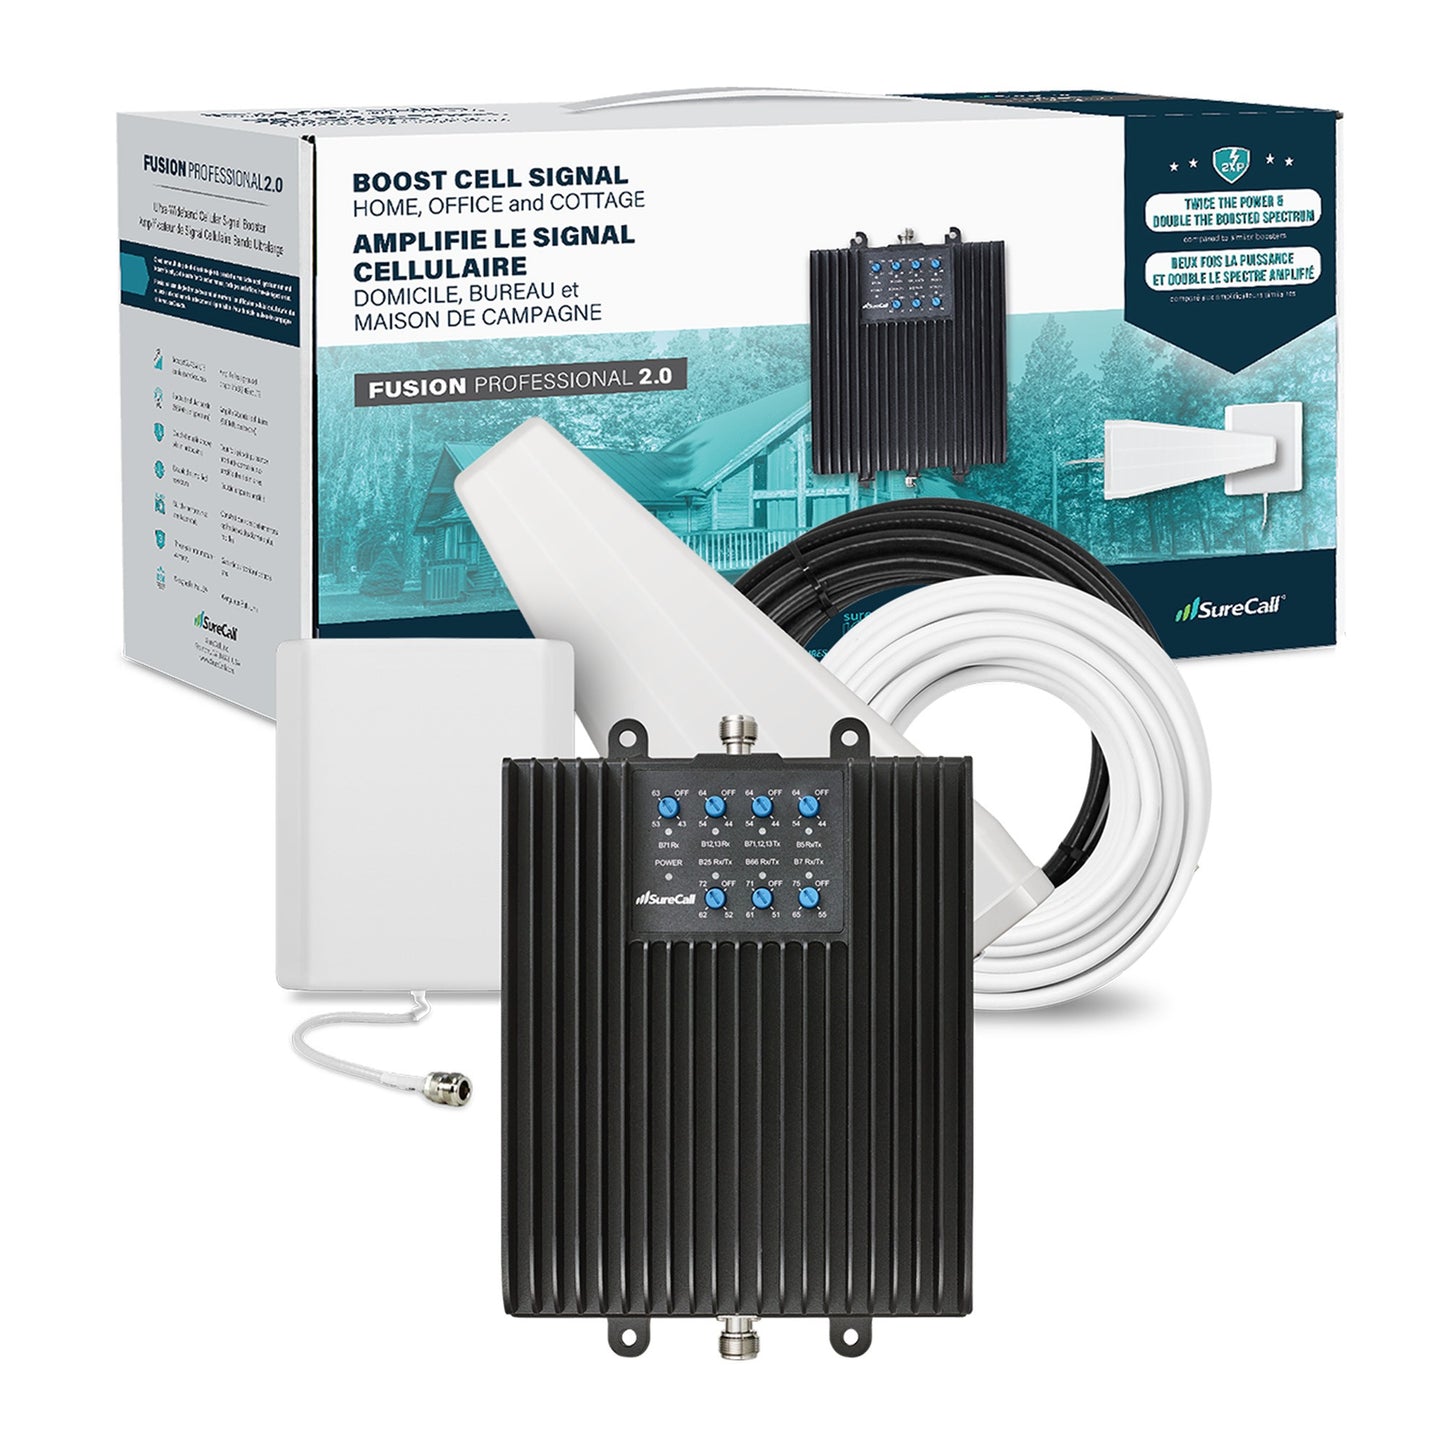 SureCall Fusion Professional 2.0 In-Building Signal Booster Kit - 15-10041